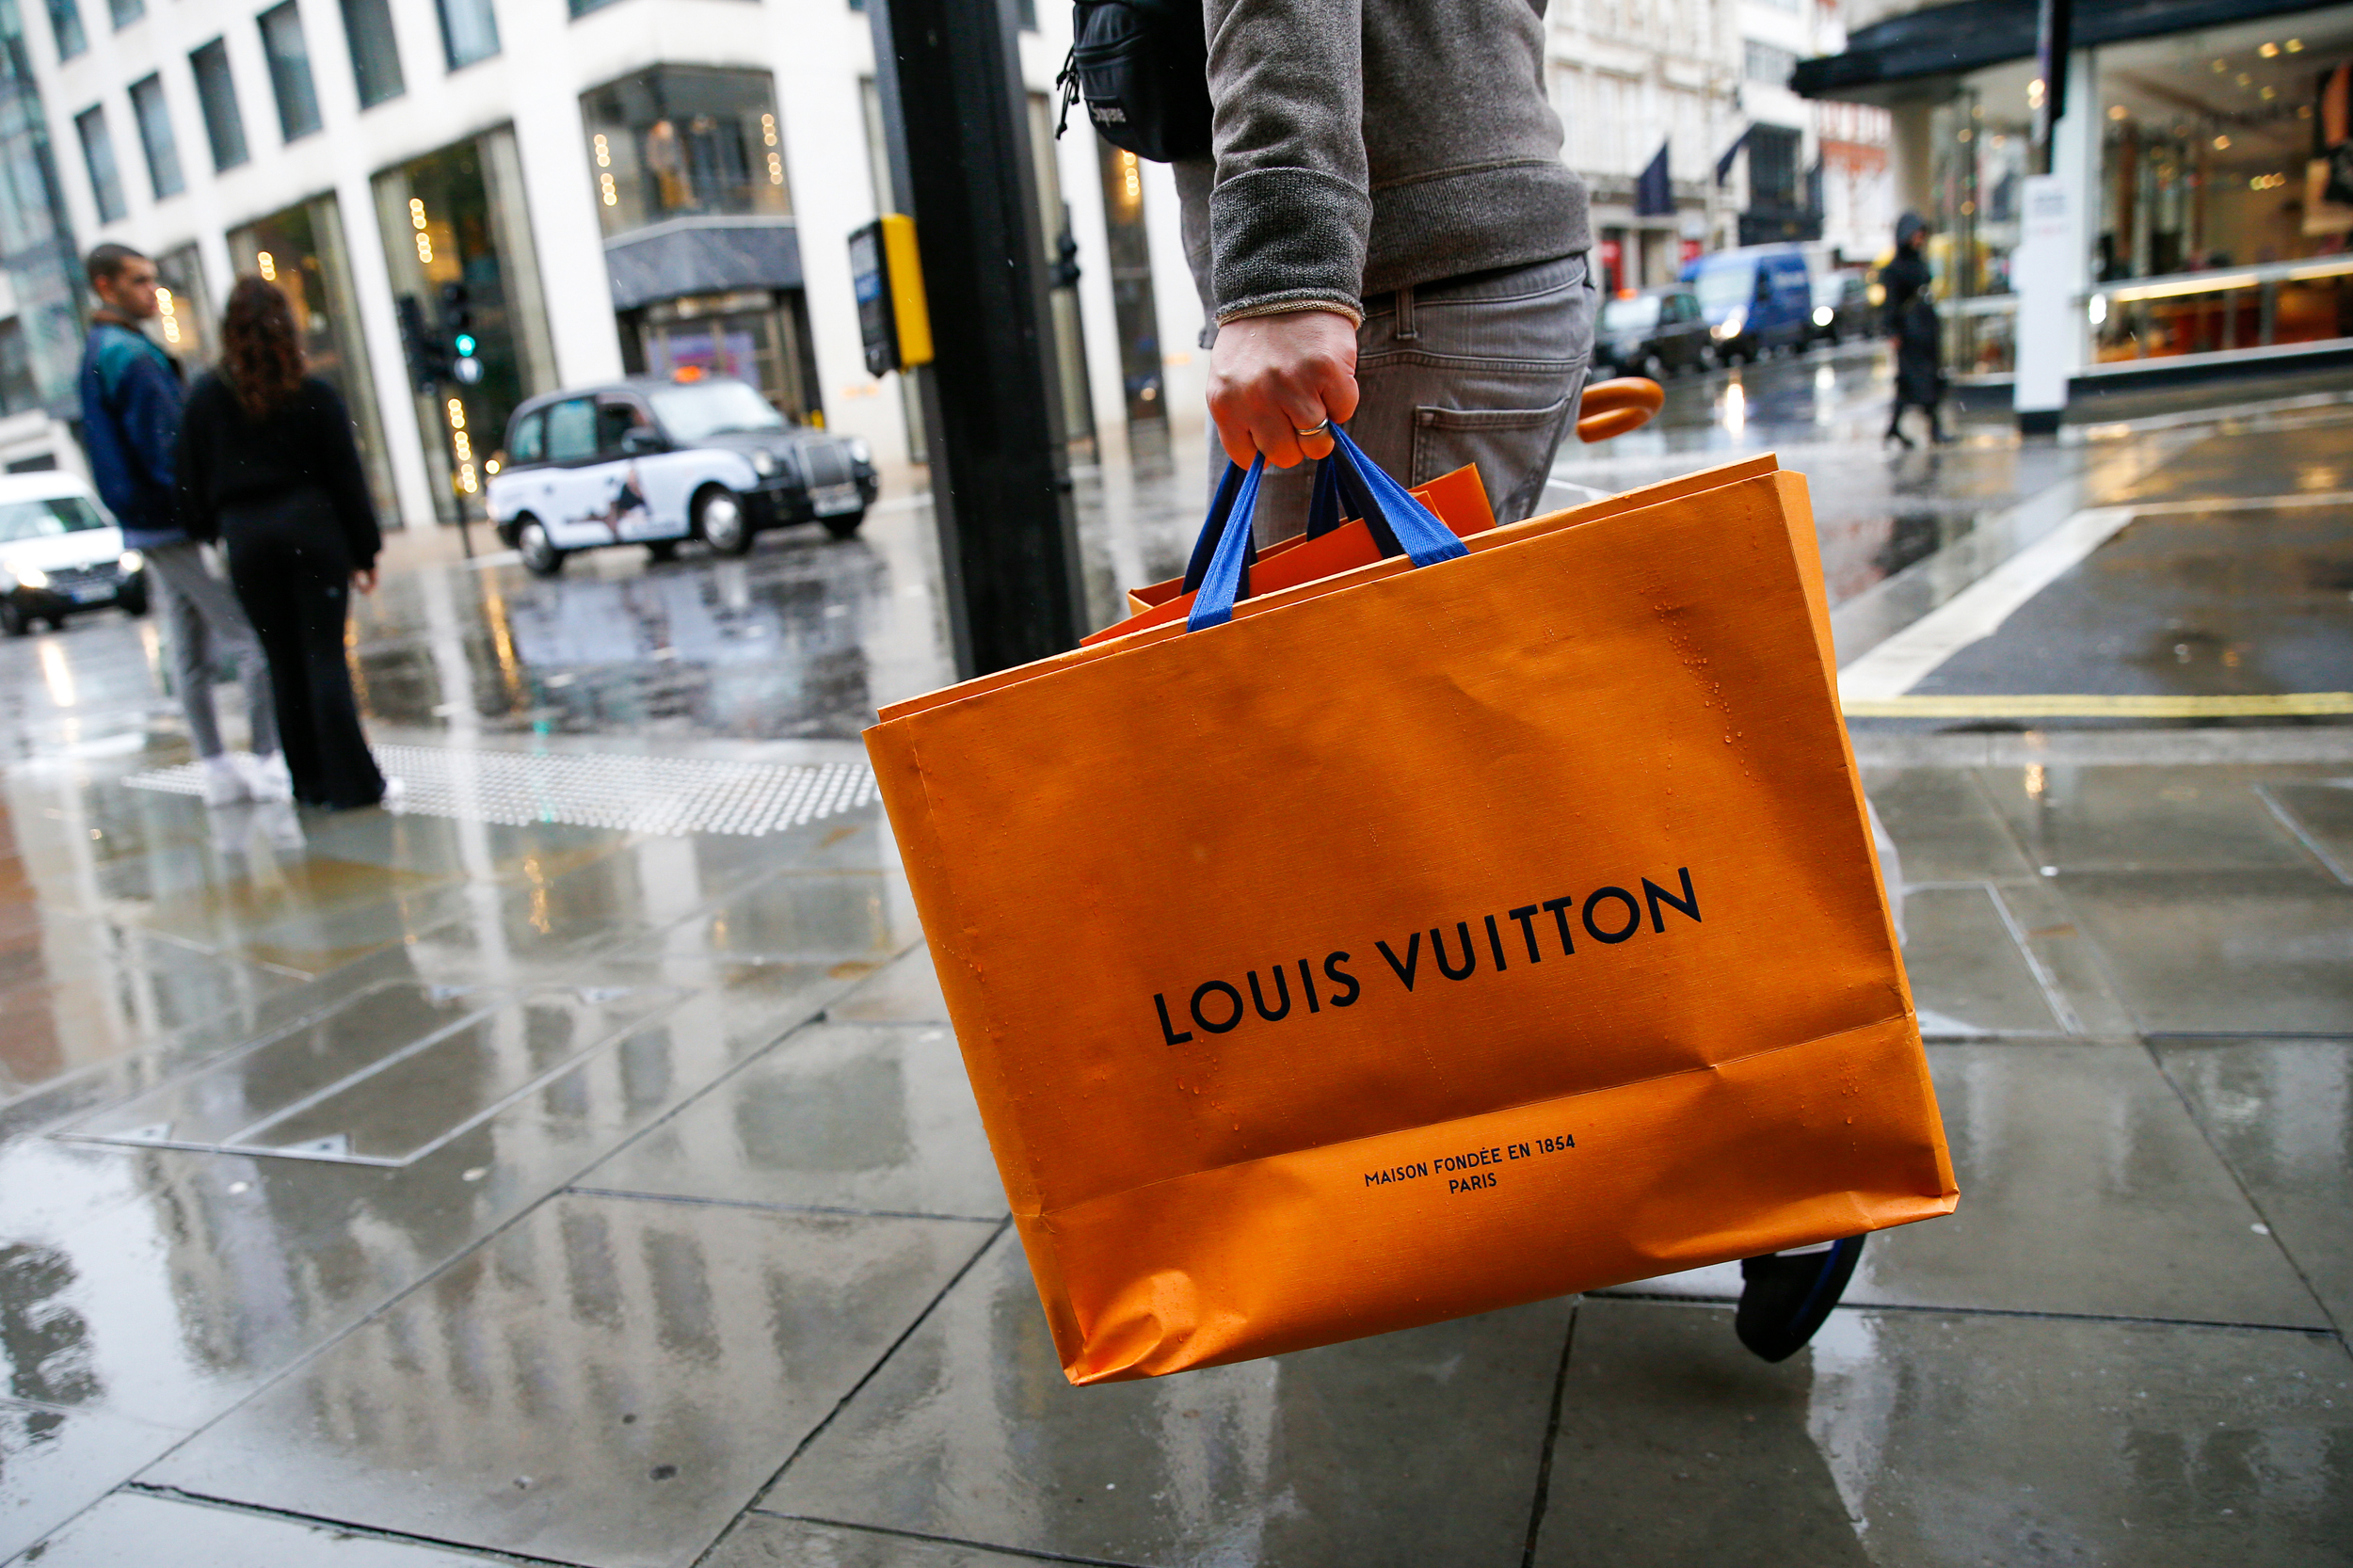 How Louis Vuitton has Impacted the World